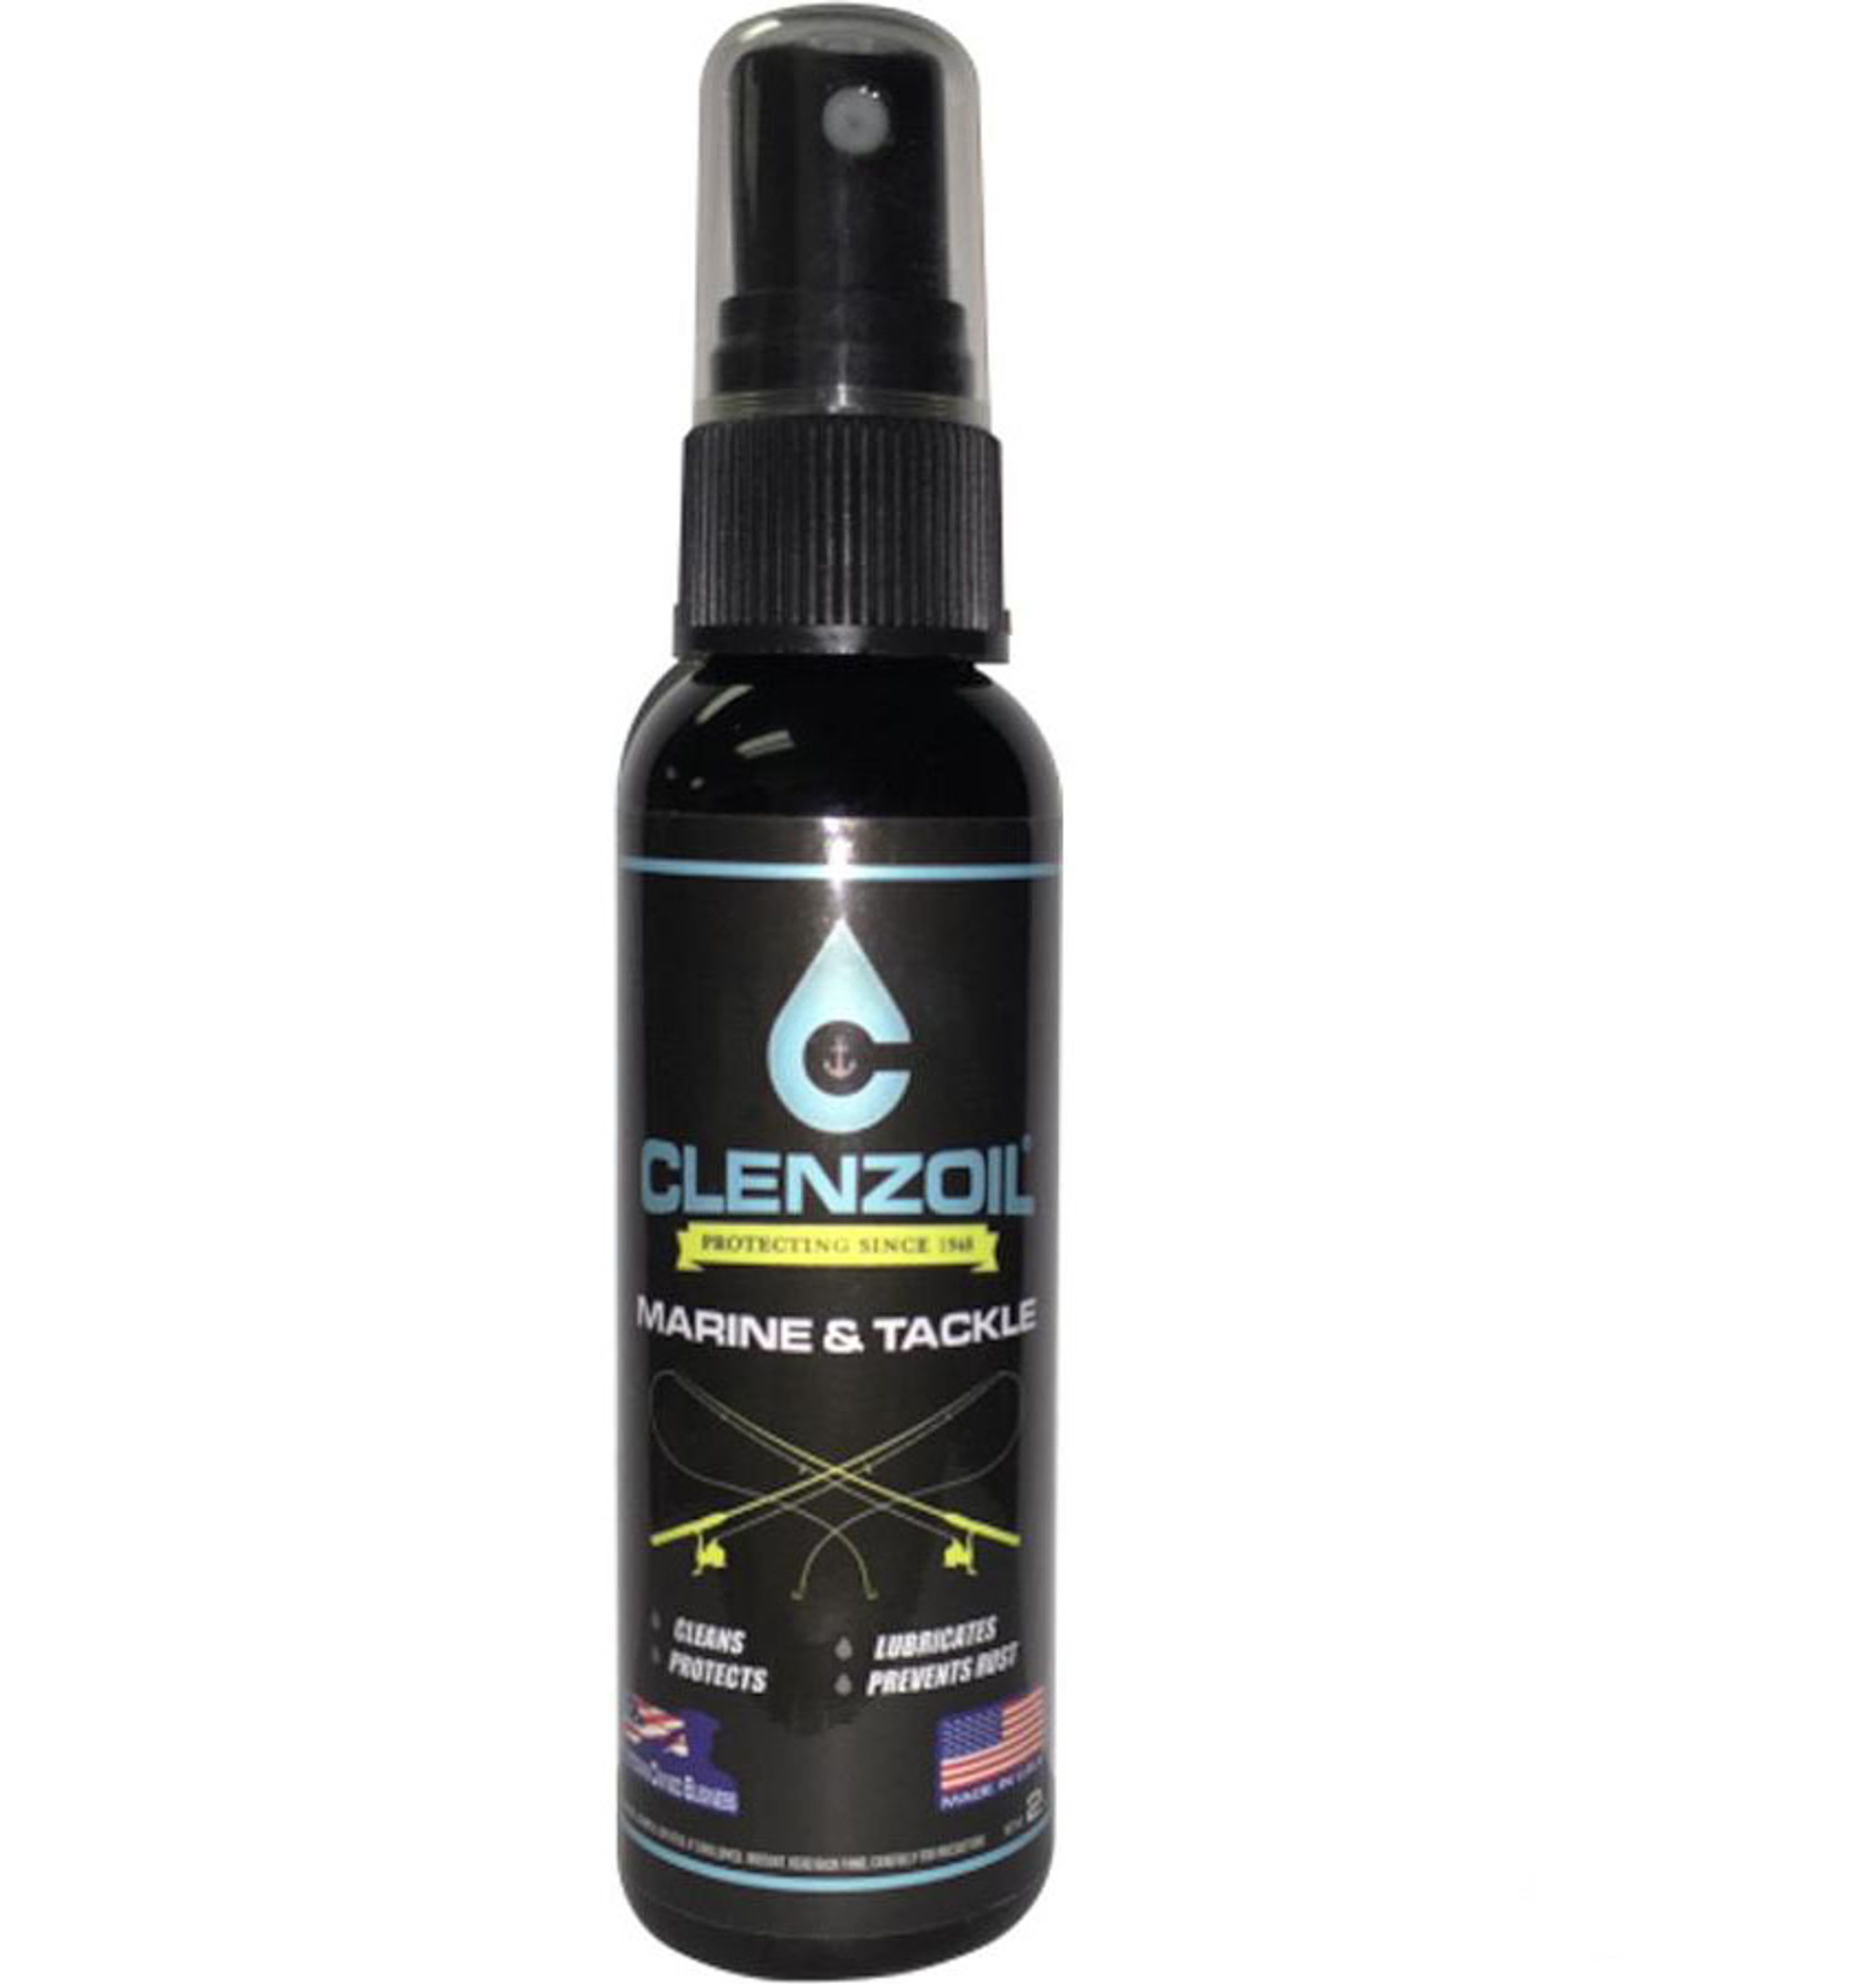 Clenzoil Marine & Tackle Lubricant and Rust Preventive (Size: 2oz Pump Sprayer)